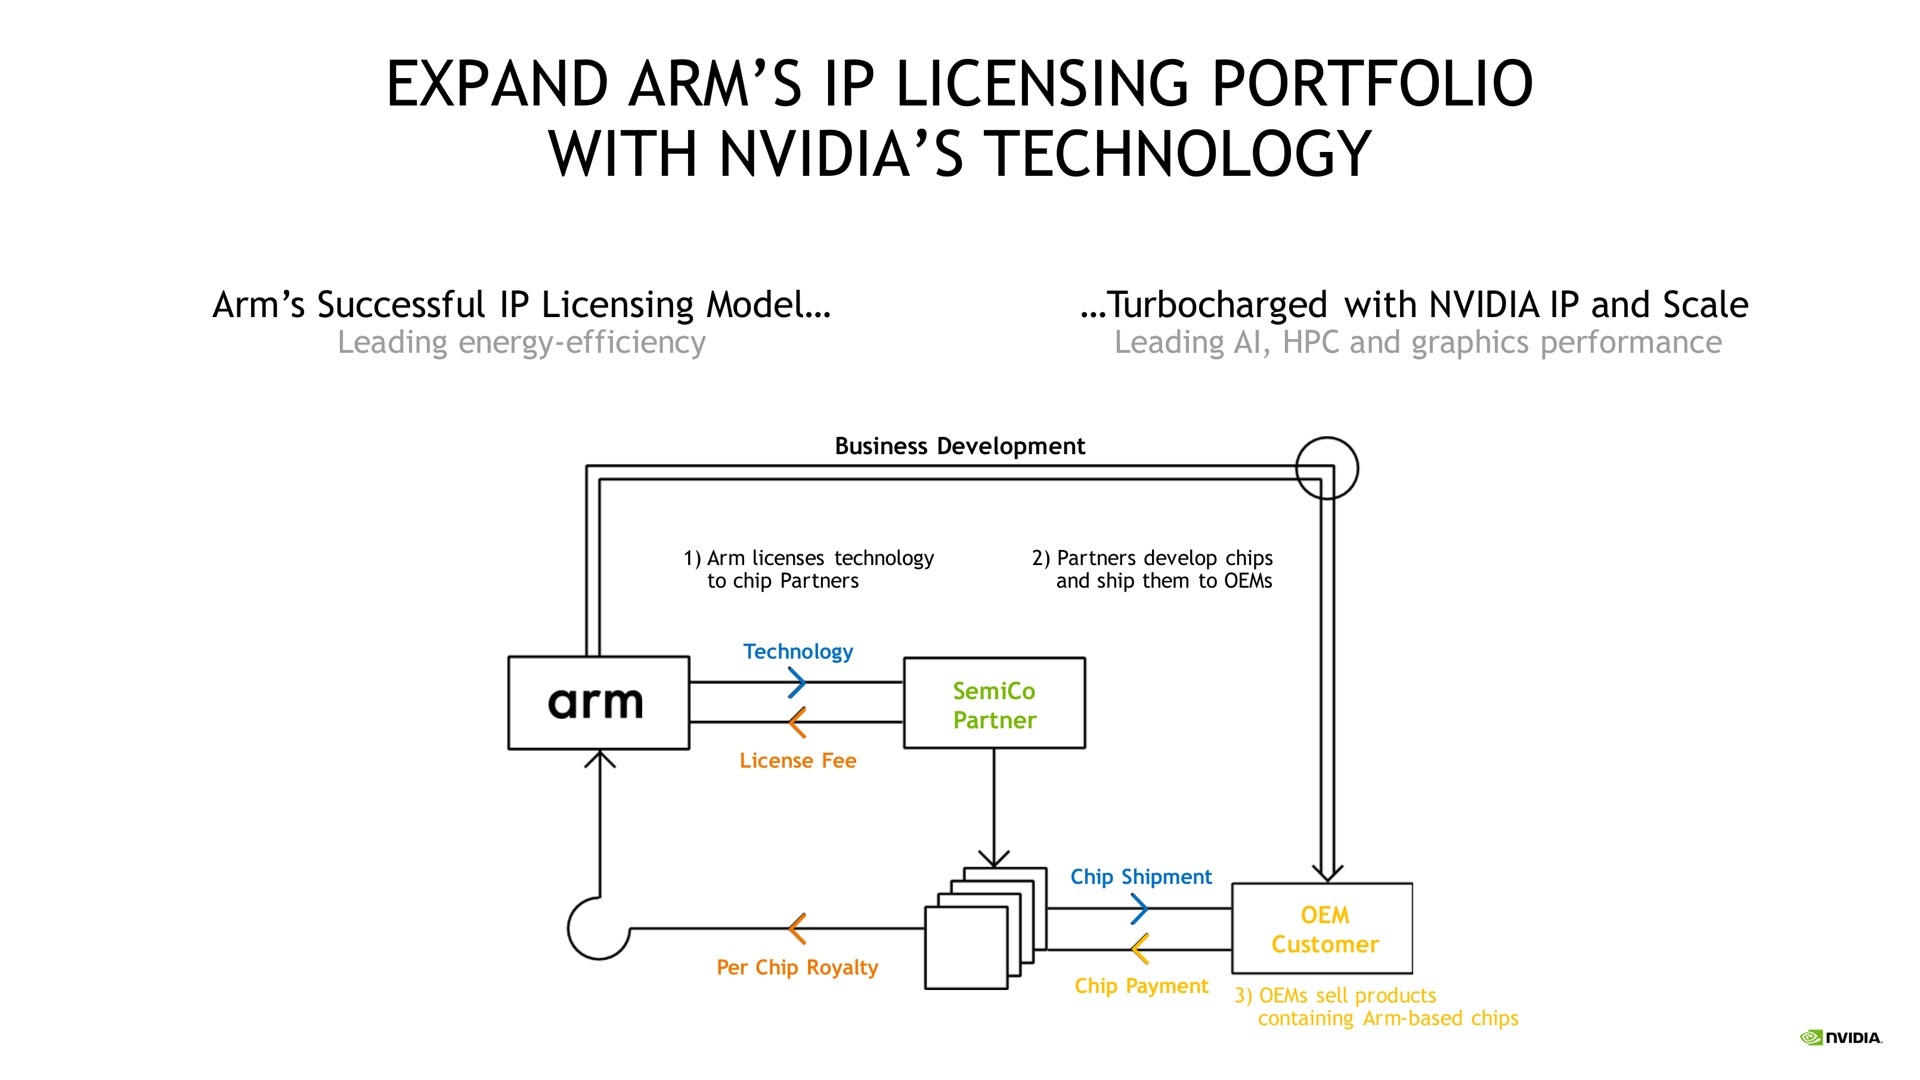 expand arm licensing portfolio with technology | NVIDIA